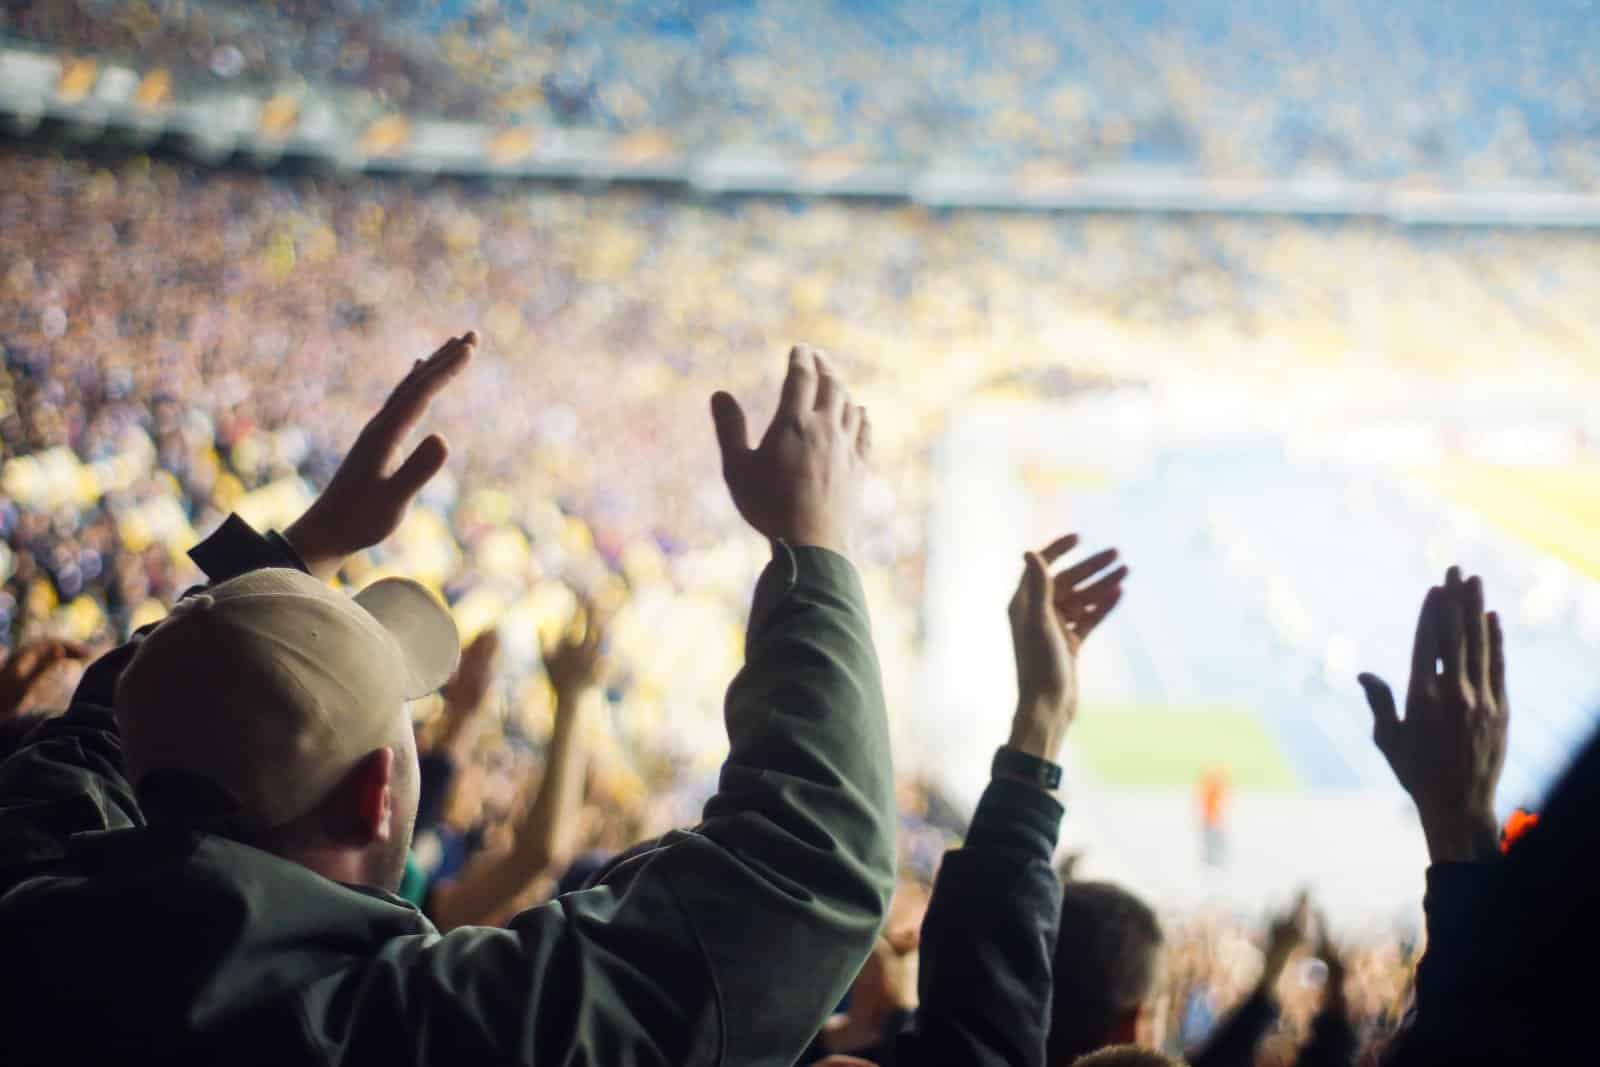 <p class="wp-caption-text">Image Credit: Shutterstock / Matushchak Anton</p>  <p>Americans take their sports seriously, with fans displaying intense loyalty to their teams, which can be intimidating for tourists attending their first American sporting event.</p>